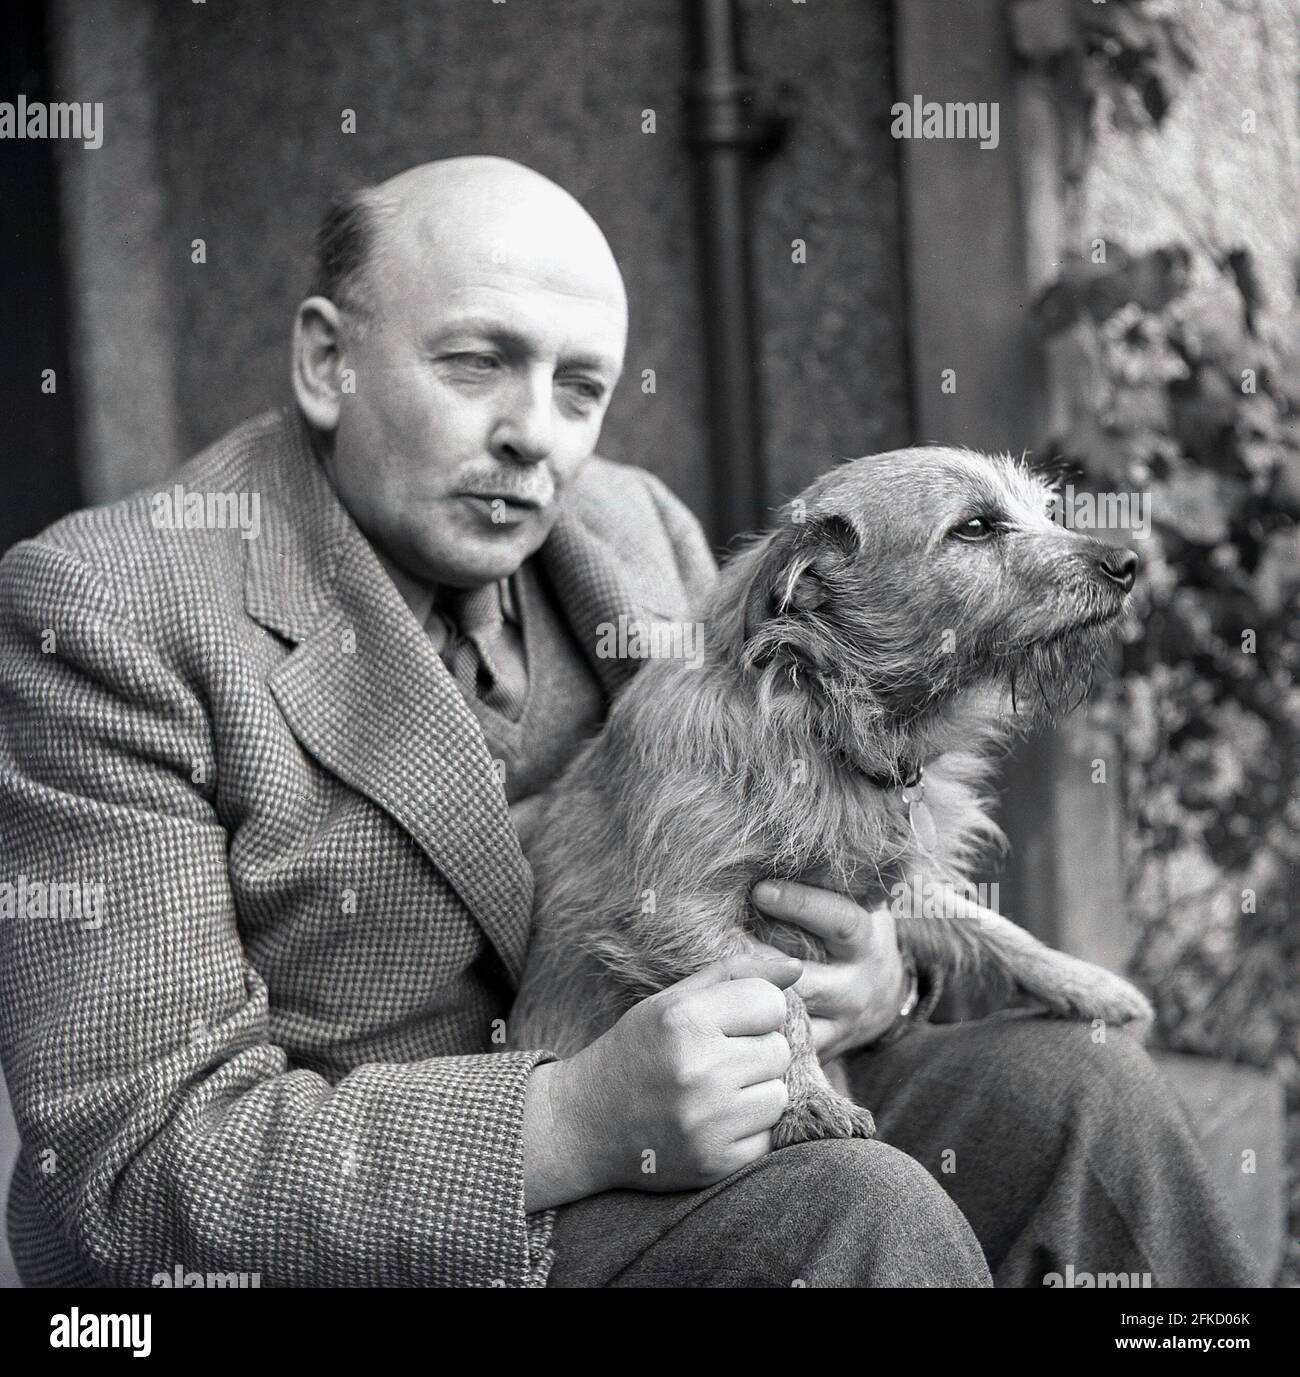 1950s, a portrait by J Allan Cash of Brian Vesey-Fitzgerald with pet dog, a naturalist and writer of books on nature, country life, birds and dogs. Also an editor of The Field magazine. He was a descendant of the Vesty-Fitzgeralds, a famous Ango-Irish family whose members became MPs in both British and Irish governments. Born in 1905 in Wrexham, Denbighshire, Wales, as Brian Percy Seymour Vesey-Fitzgerald, he is seen here wearing traditonal country clothing of a tweed jacket and tie. He was also an authority on the history of Gypsies in the British Isles with several books on the subject. Stock Photo